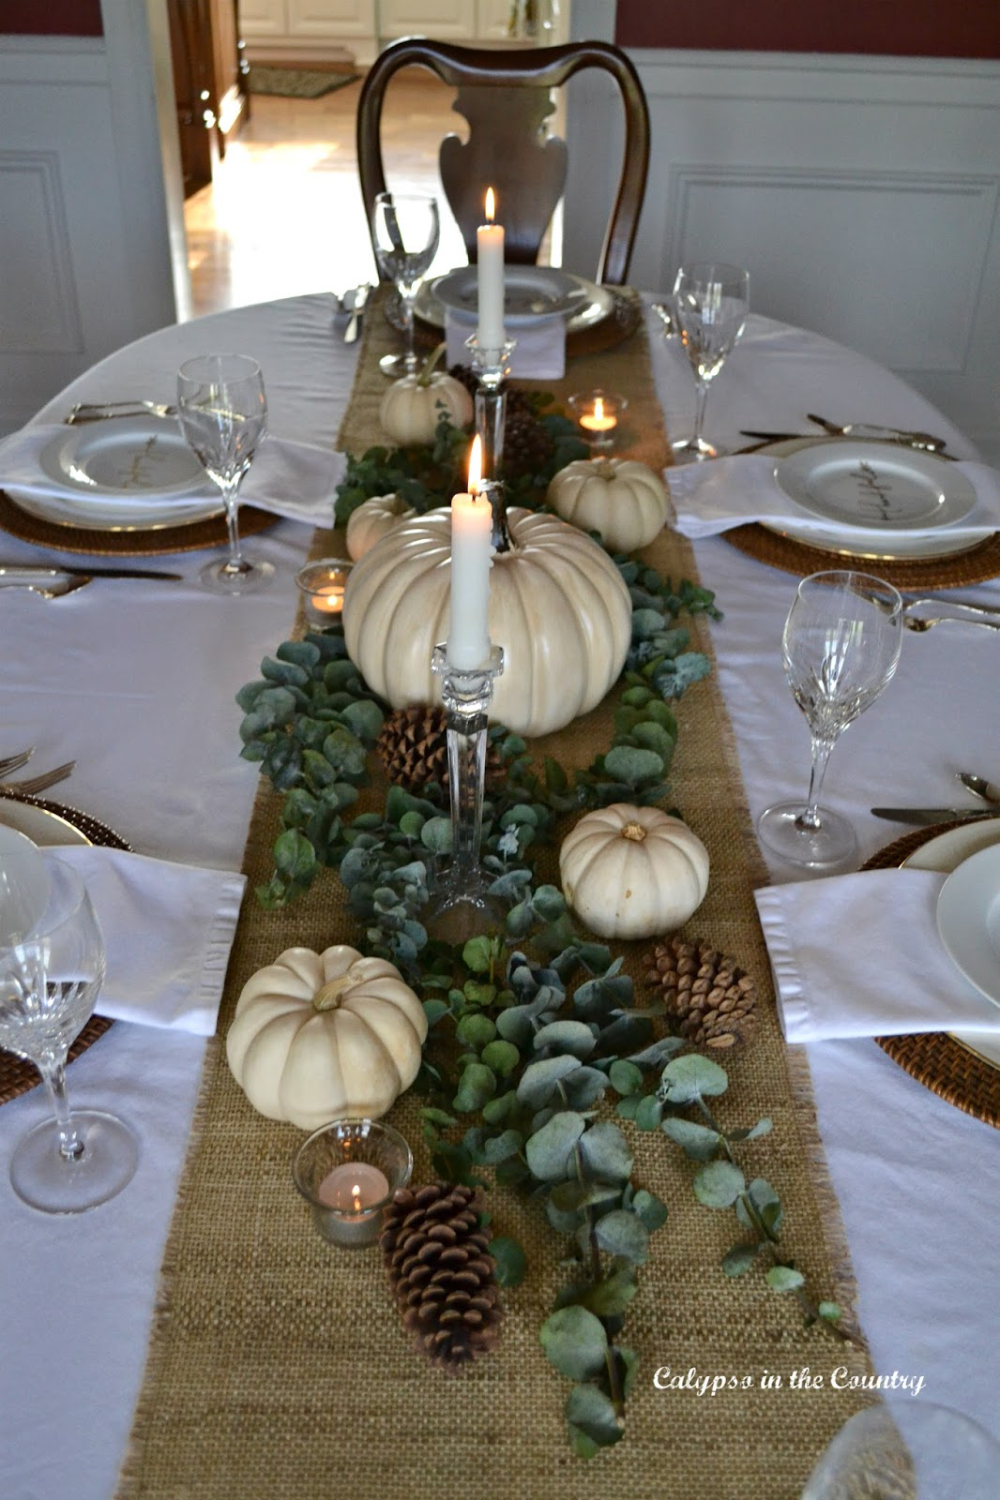 Elegant Thanksgiving Table Setting with White Pumpkins - Calypso in the Country -   18 diy thanksgiving table decor simple ideas